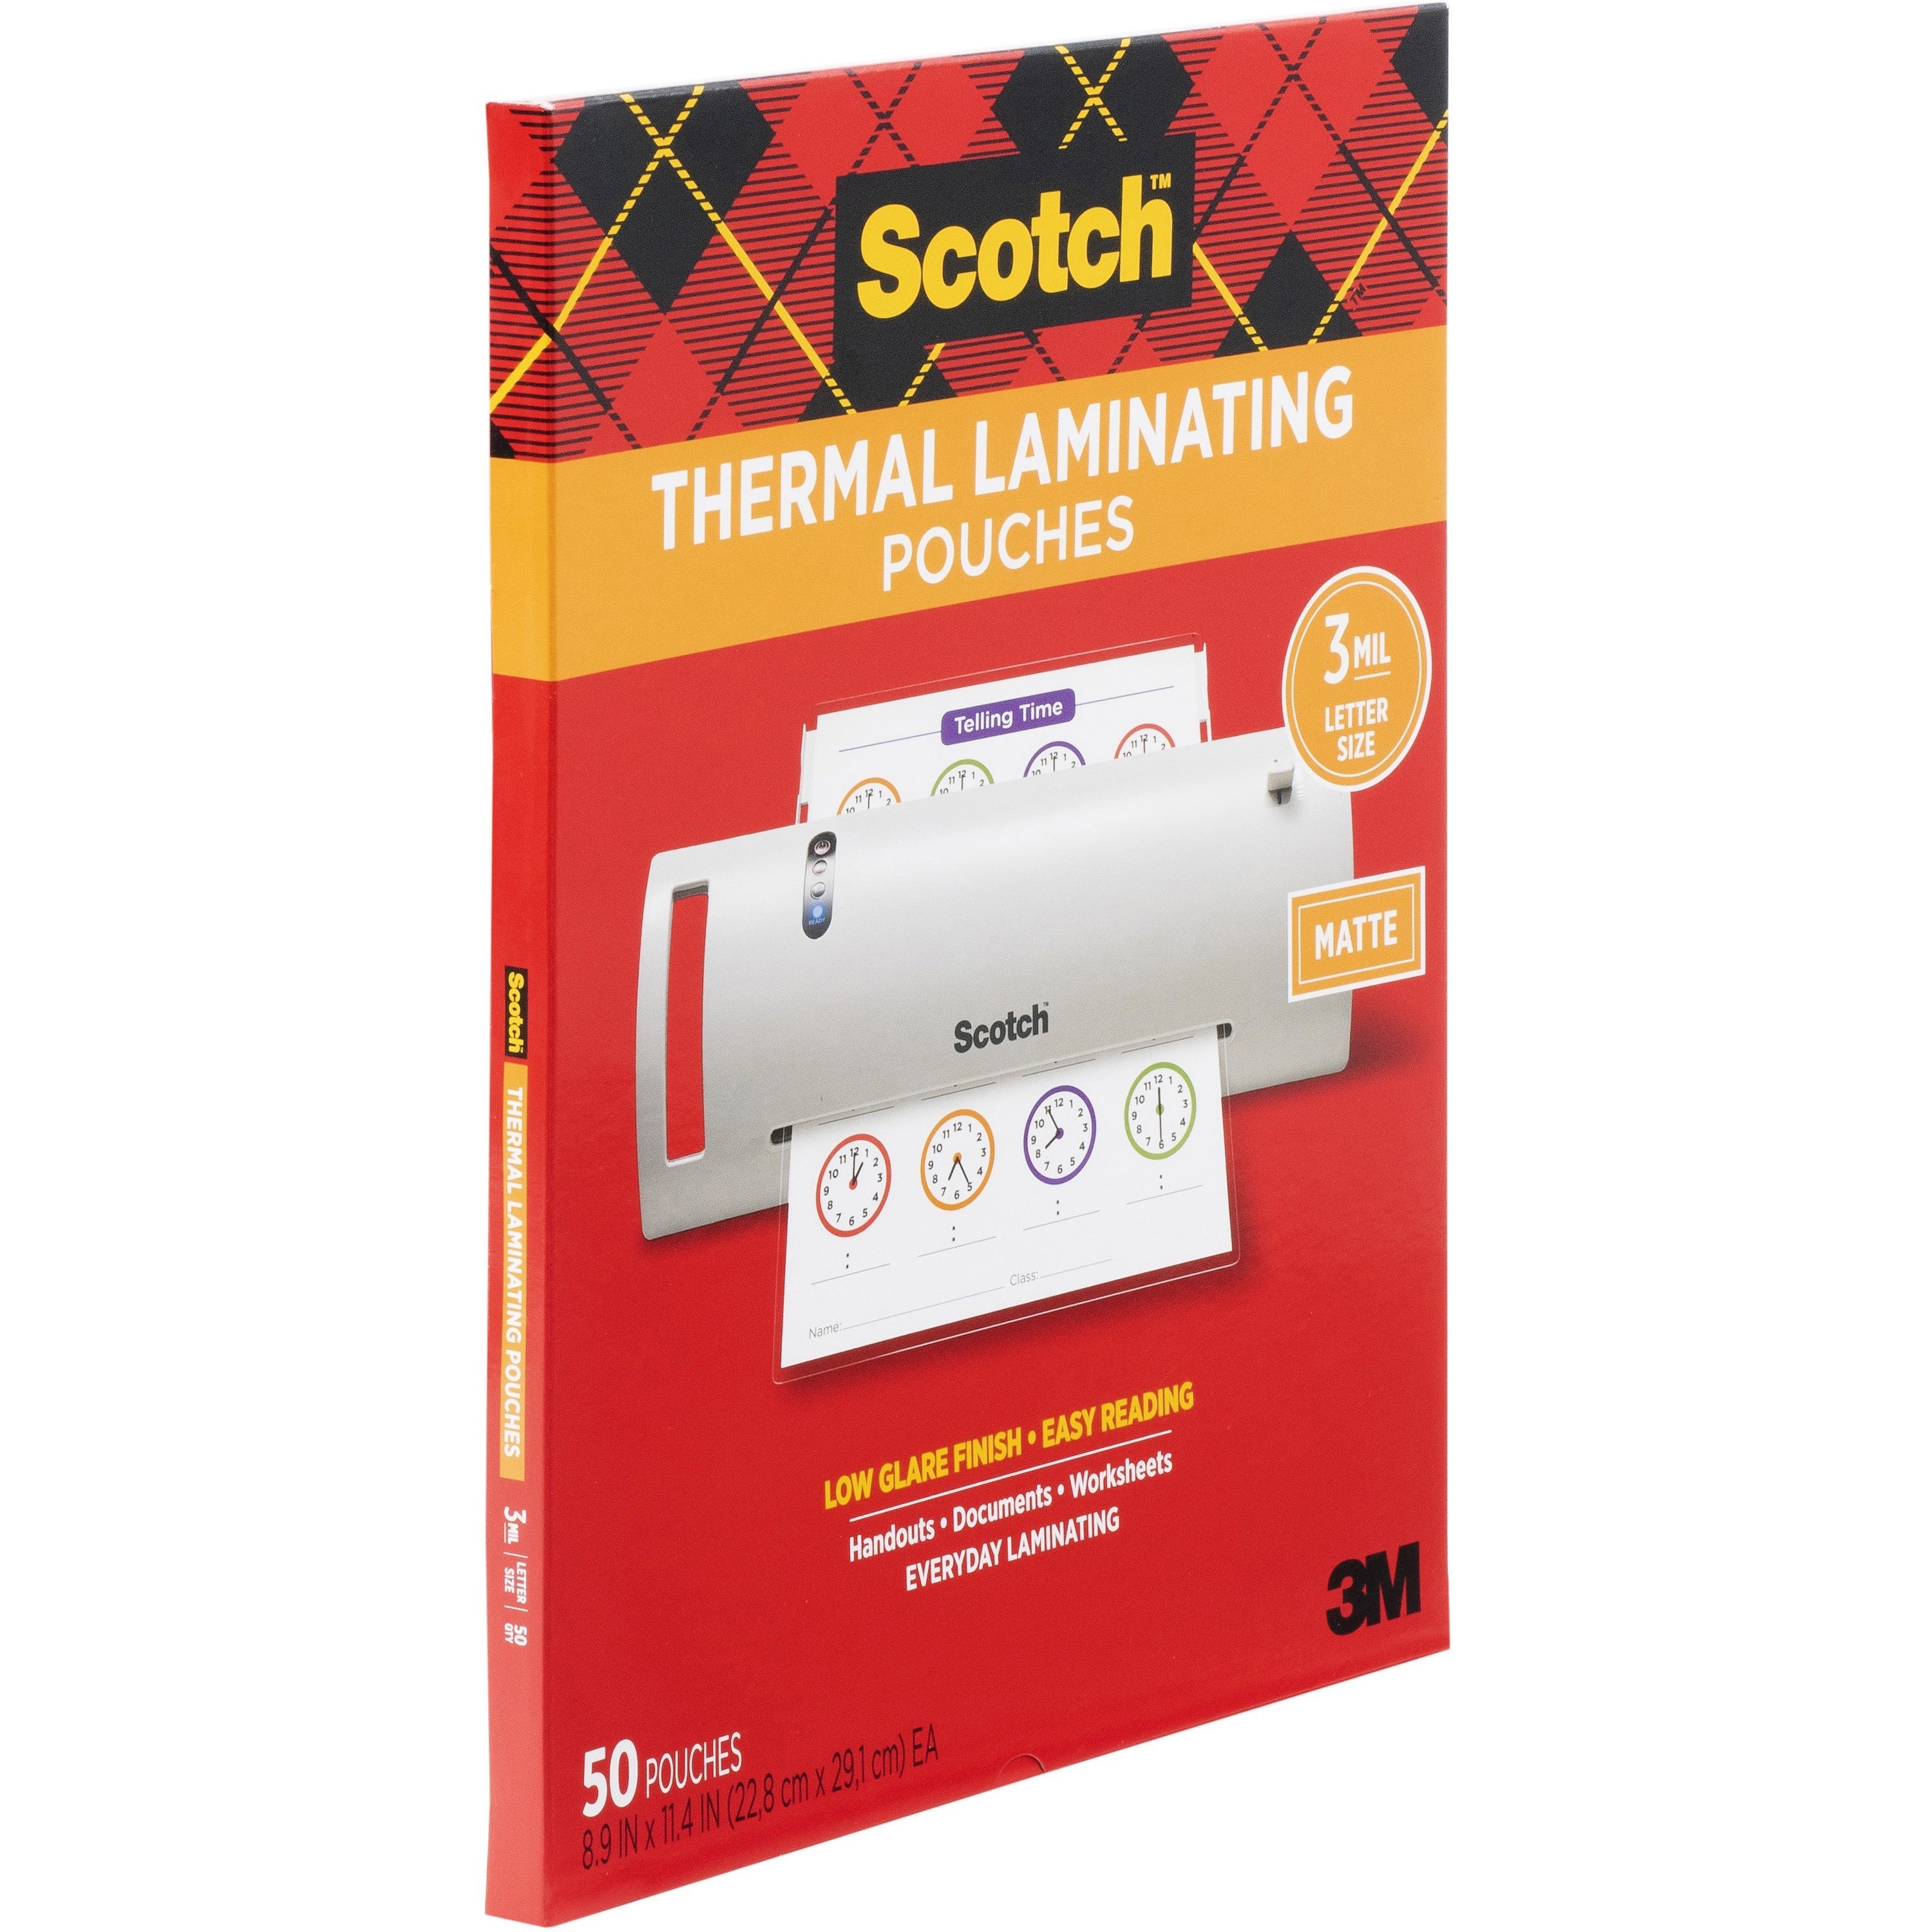 scotch-laminating-pouch-laminating-pouch-sheet-size-890-width-x-1140-length-x-3-mil-thickness-for-laminator-document-award-sign-calendar-certificate-artwork-schedule-double-sided-clear-1-pack_mmmtp385450m - 4